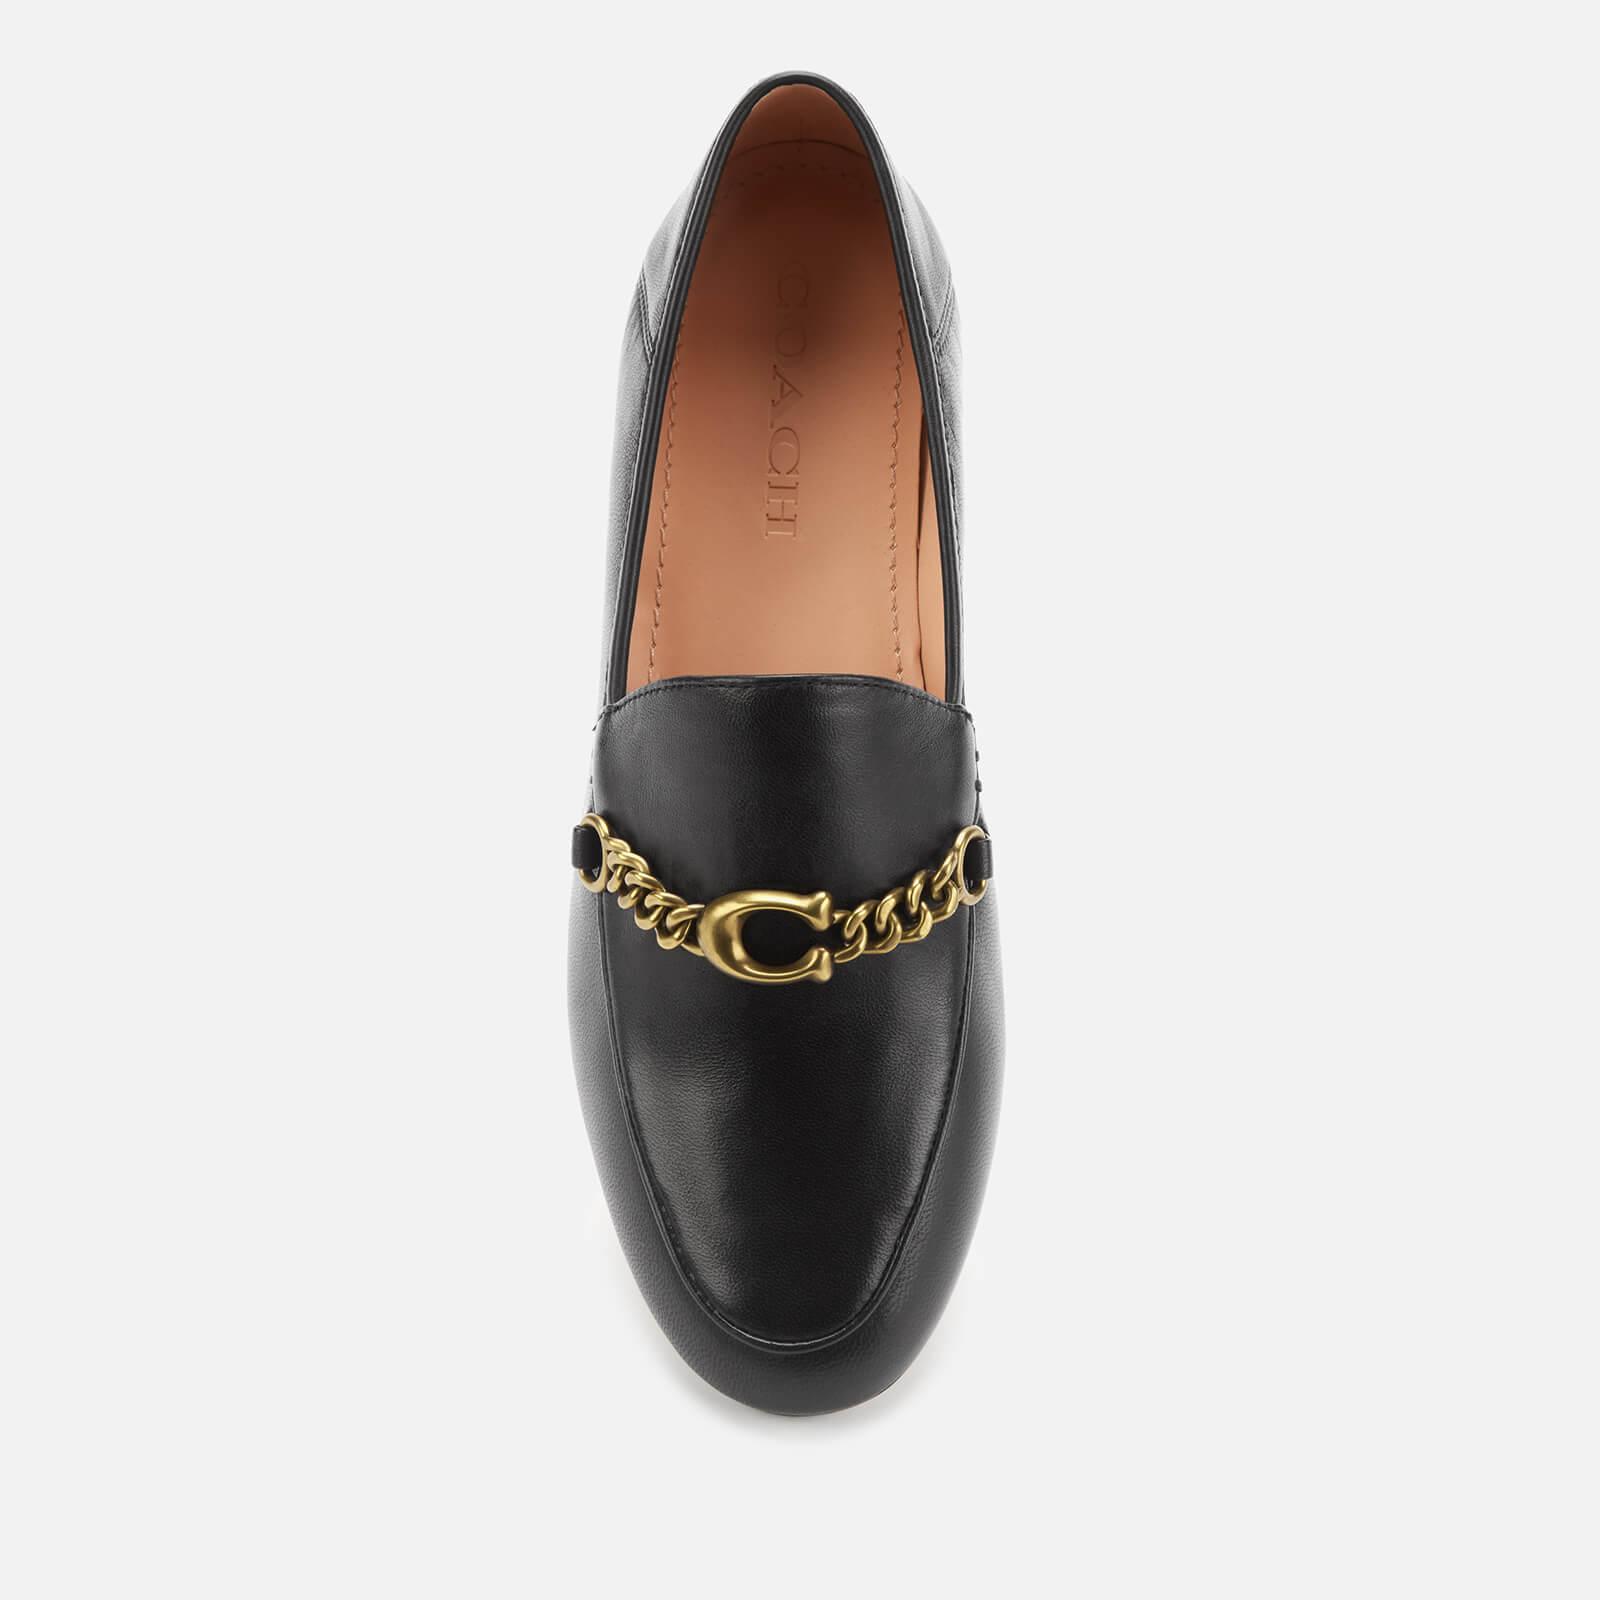 COACH Helena C Chain Leather Loafers in Black - Lyst